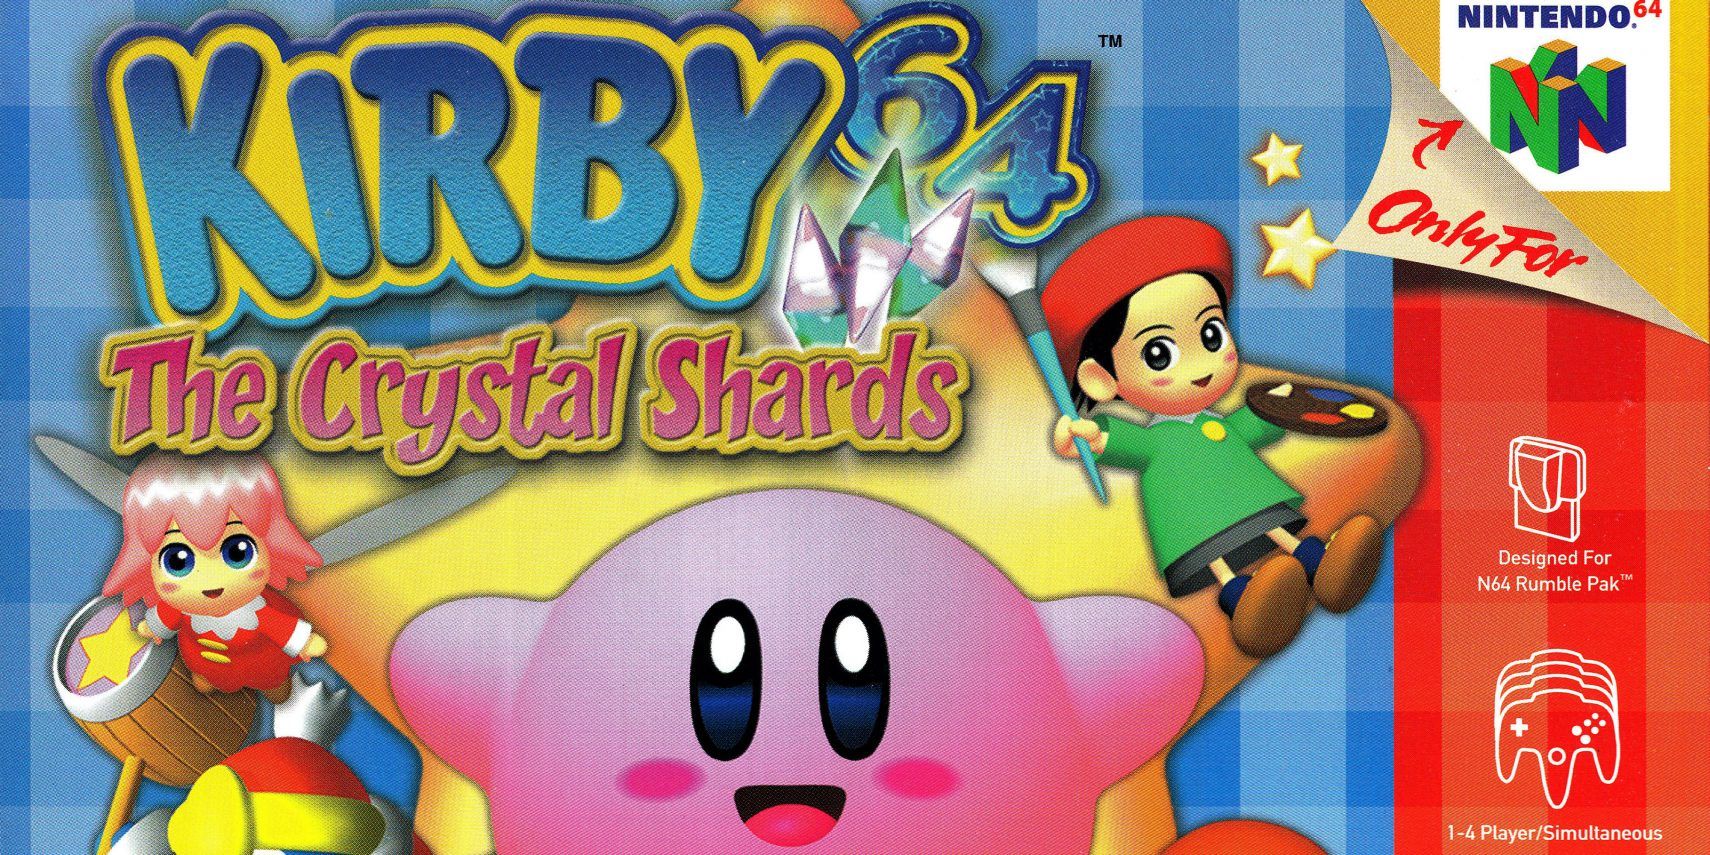 Is Kirby A Boy? & 9 Other Interesting Facts About The Nintendo Character